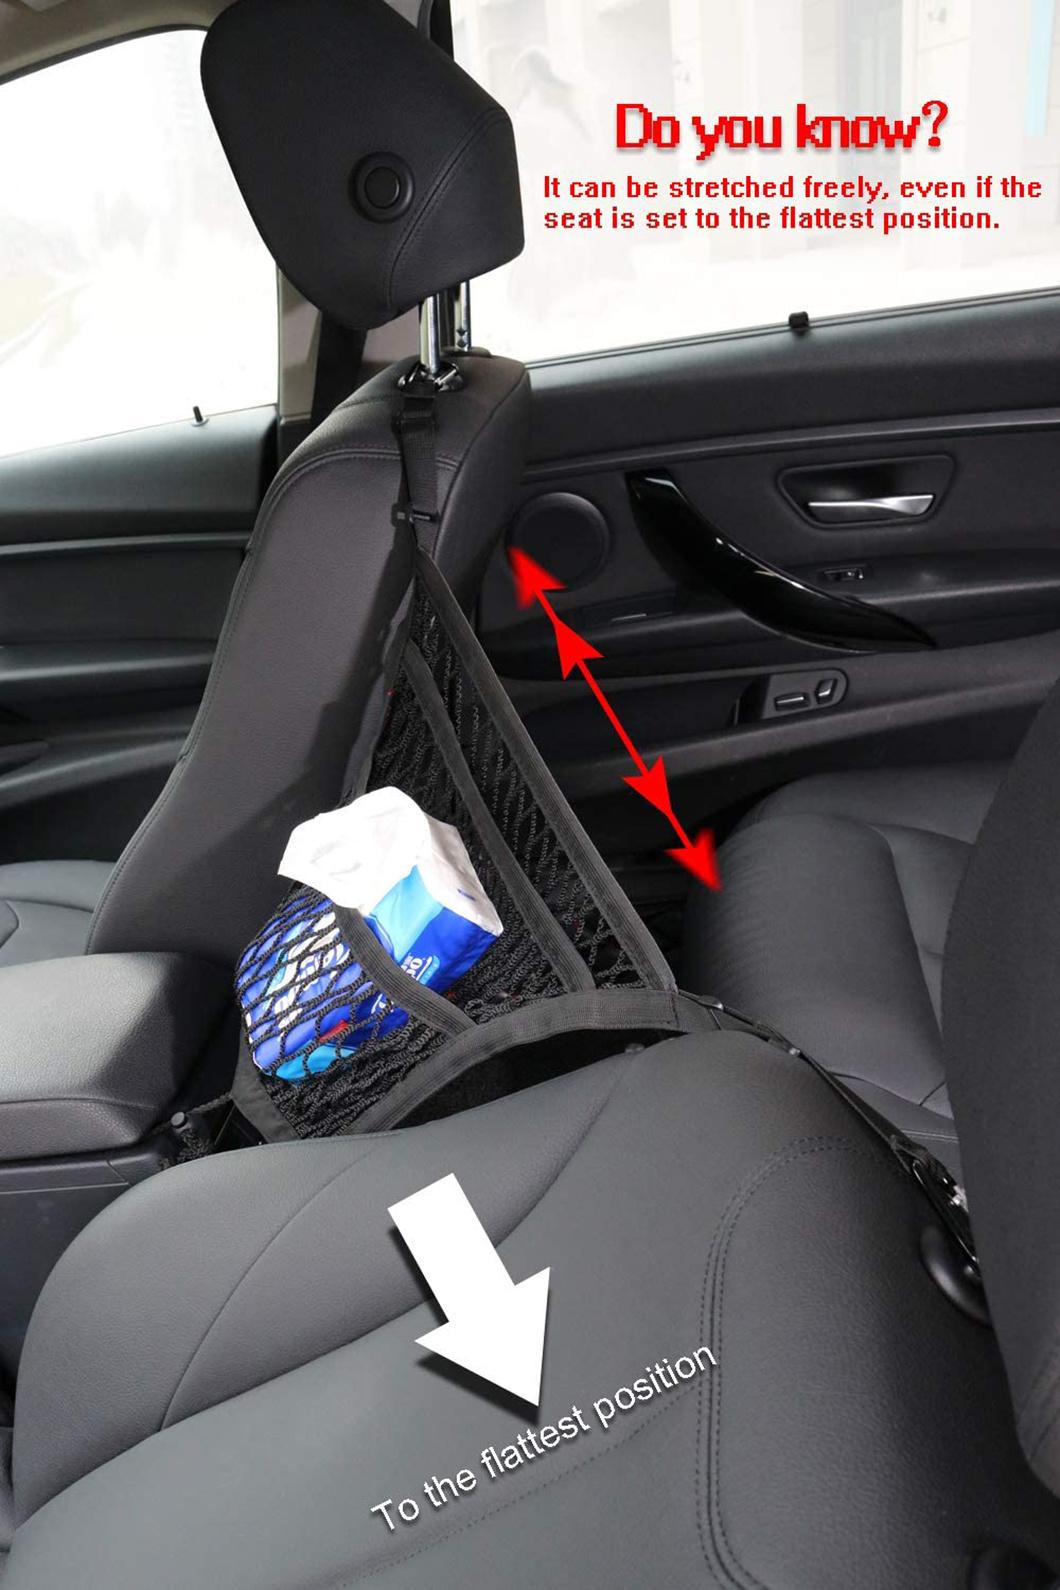 Dog Car Net 3 Layers Barrier Back Safety Mesh Seat Stretchable Organizer, for Safe Driving, Design for Safety of Driving with Children & Pets